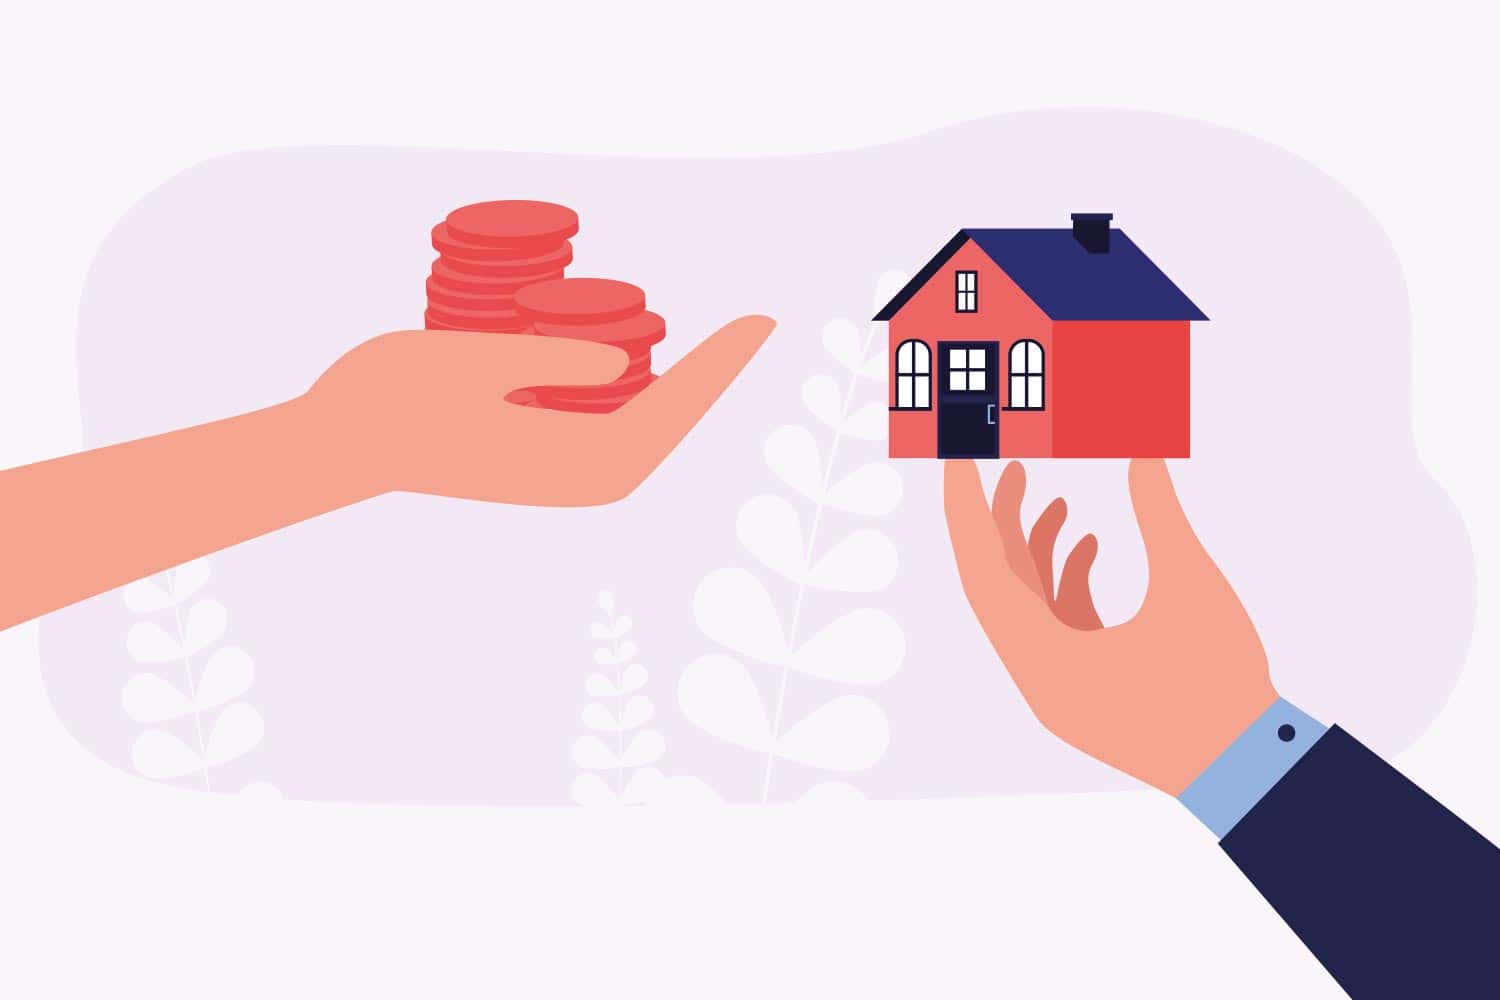 Illustration of a hand holding up money and another hand holding up a house